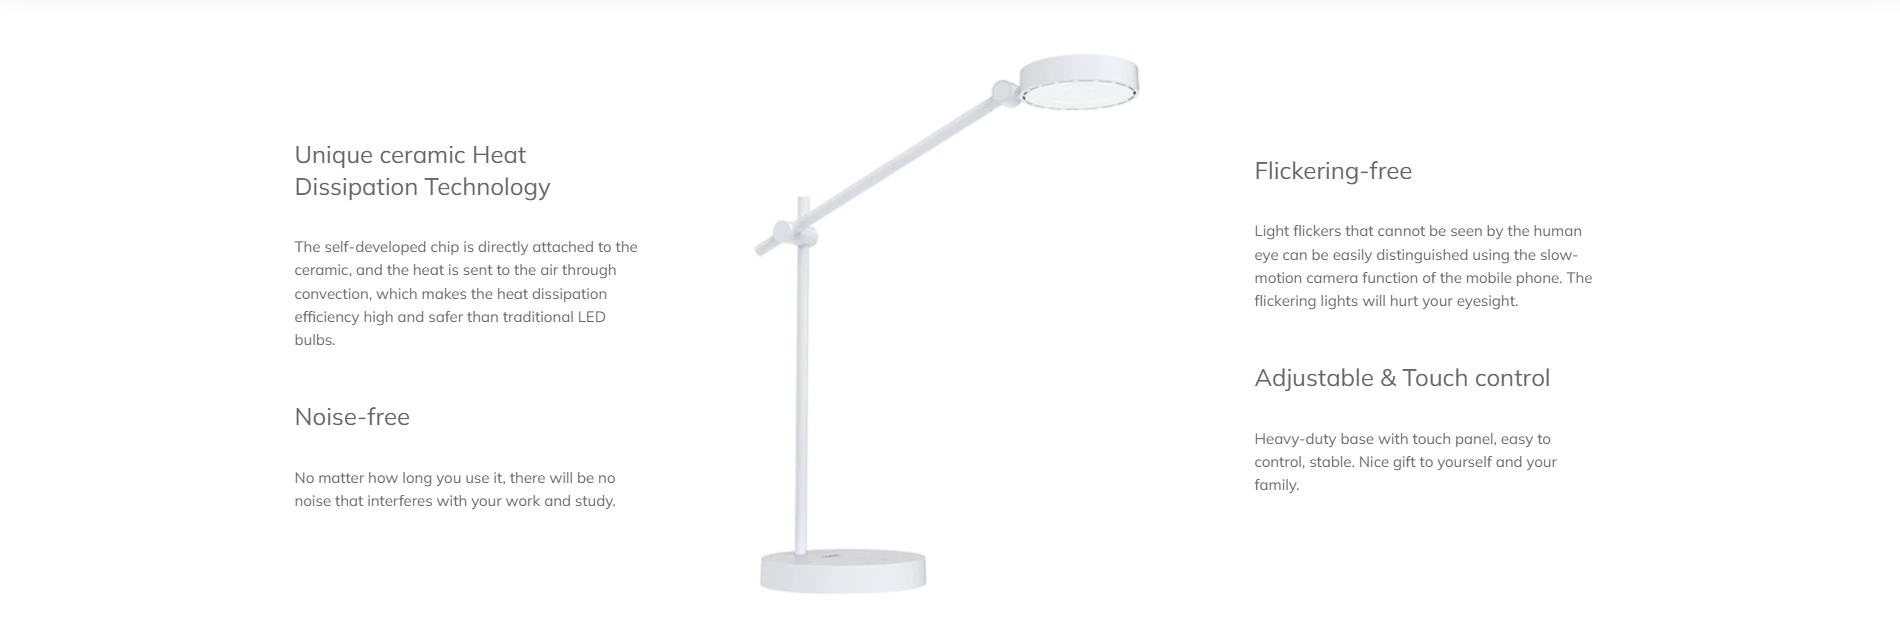 10W desk lamp has unique ceramic heat dissipation technology, noise free, flicker free, can be controlled by touch